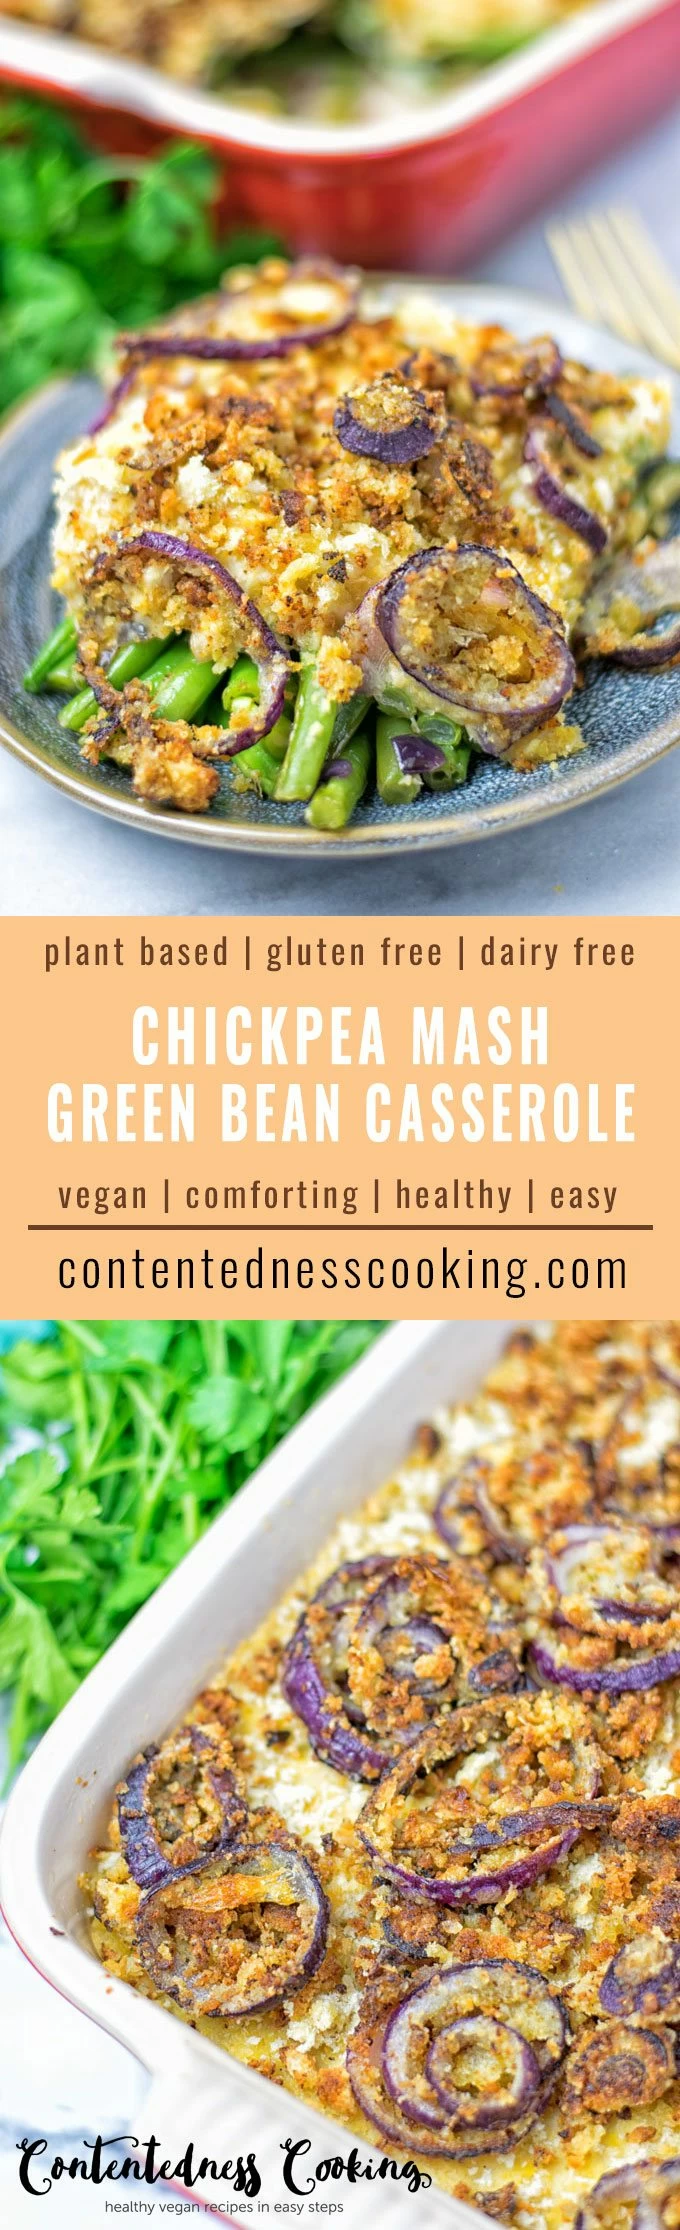 Collage of two pictures of this Chickpea Mash Green Bean Casserole with recipe title text.